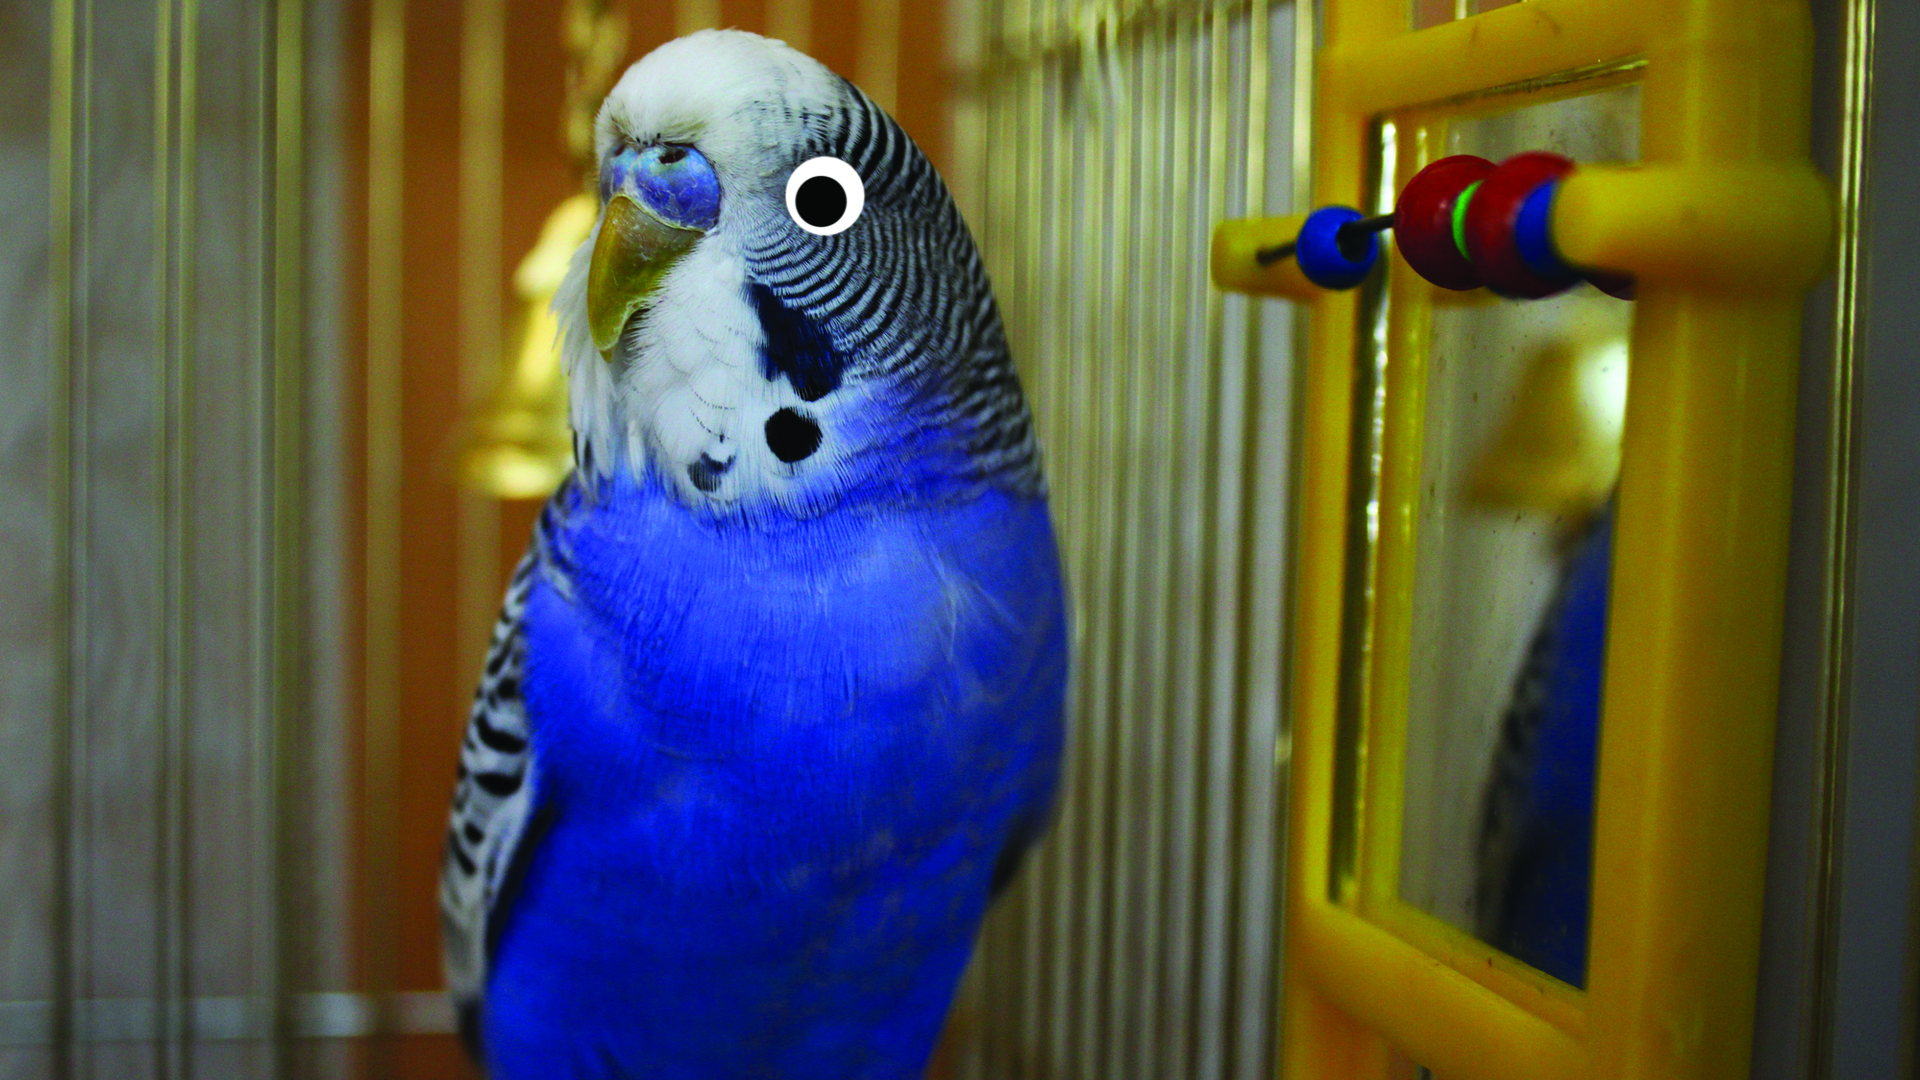 A budgie unaware they have a mirror